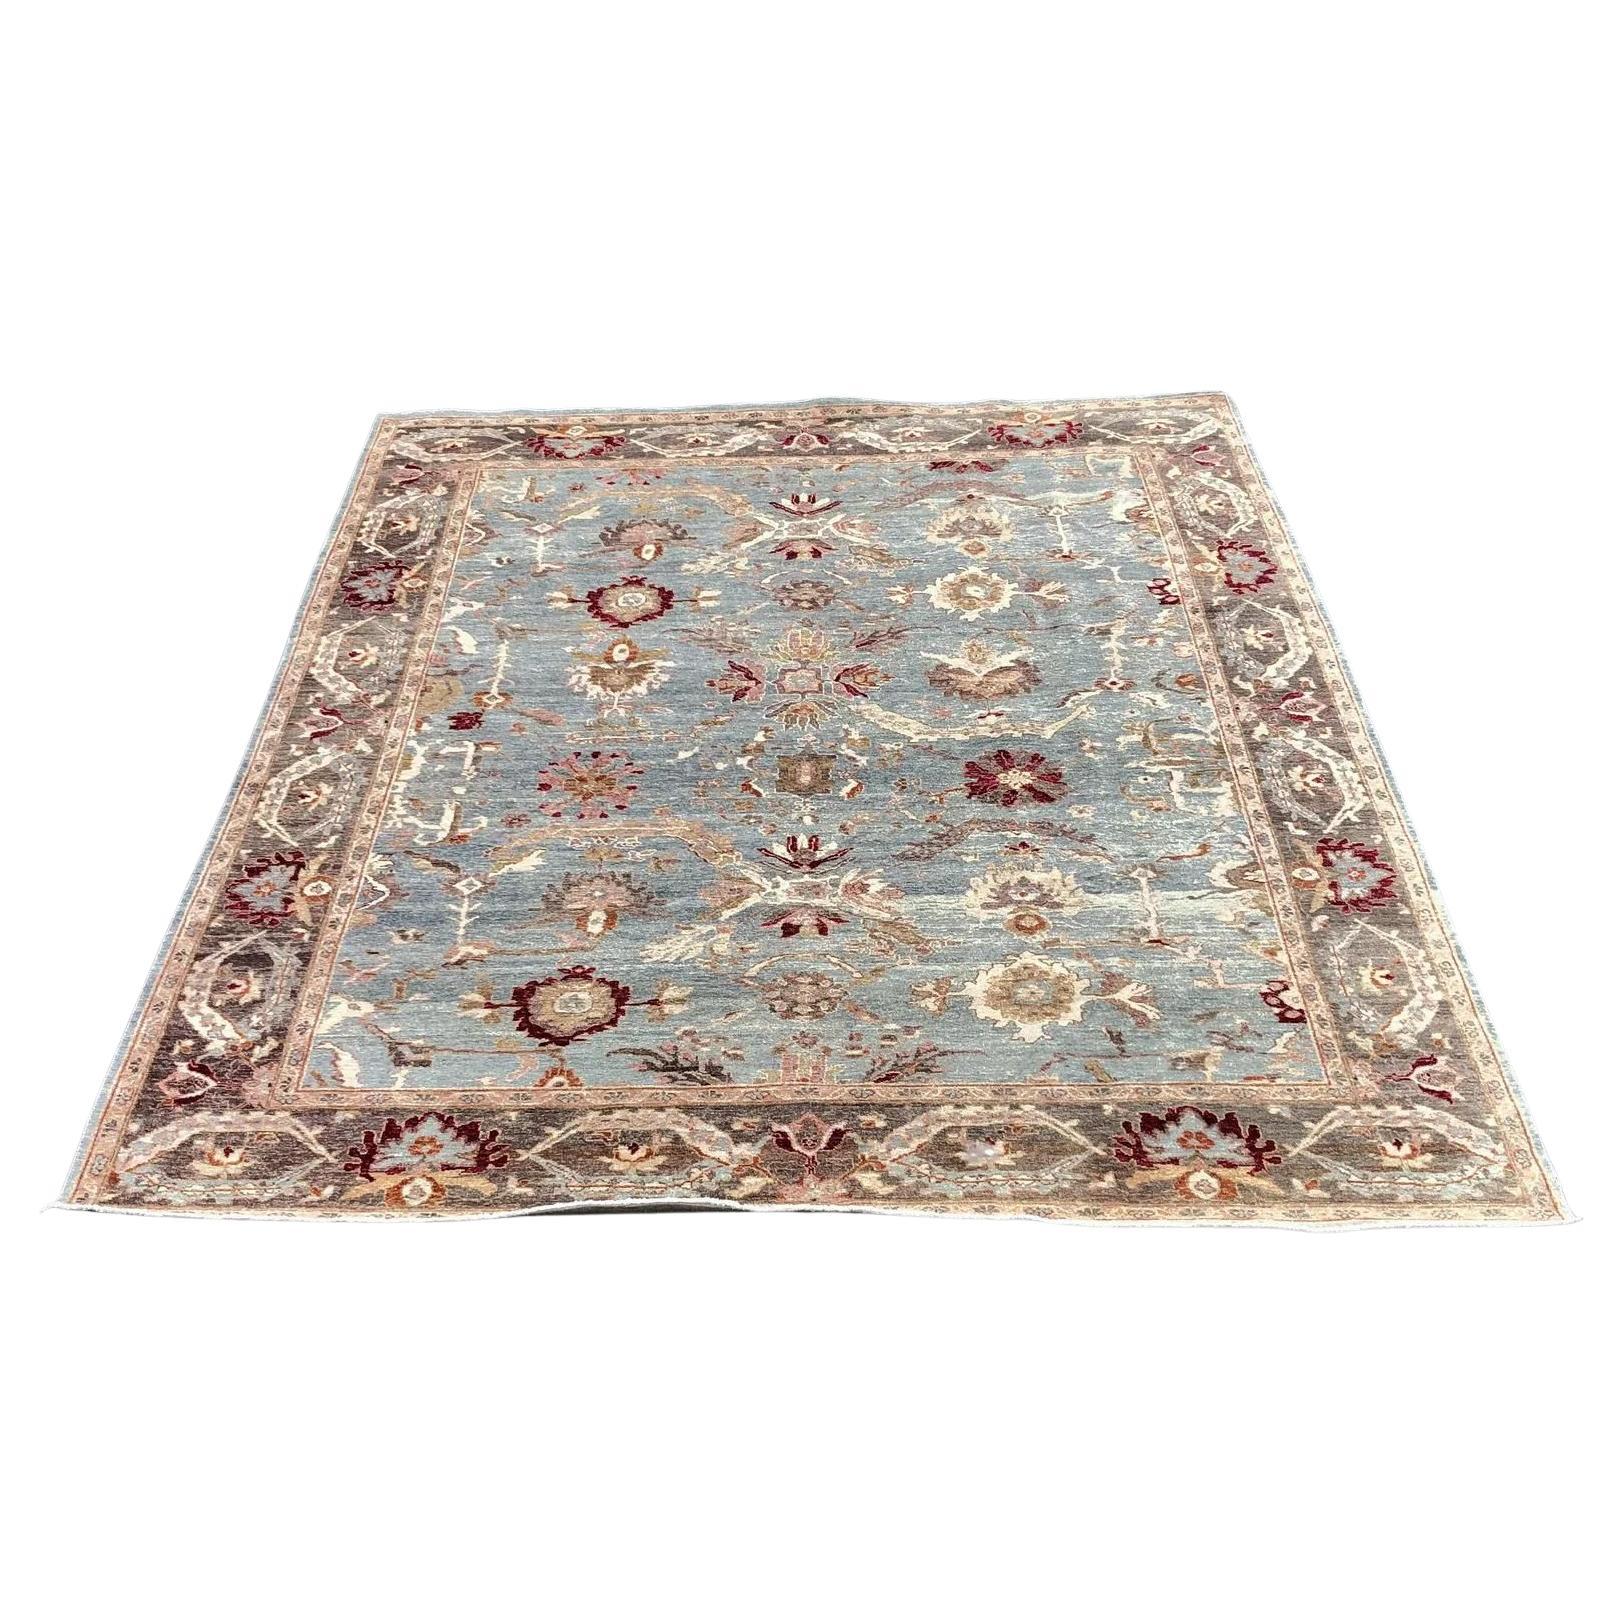 Contemporary Turkish Oushak Hand-Knotted Wool Rug